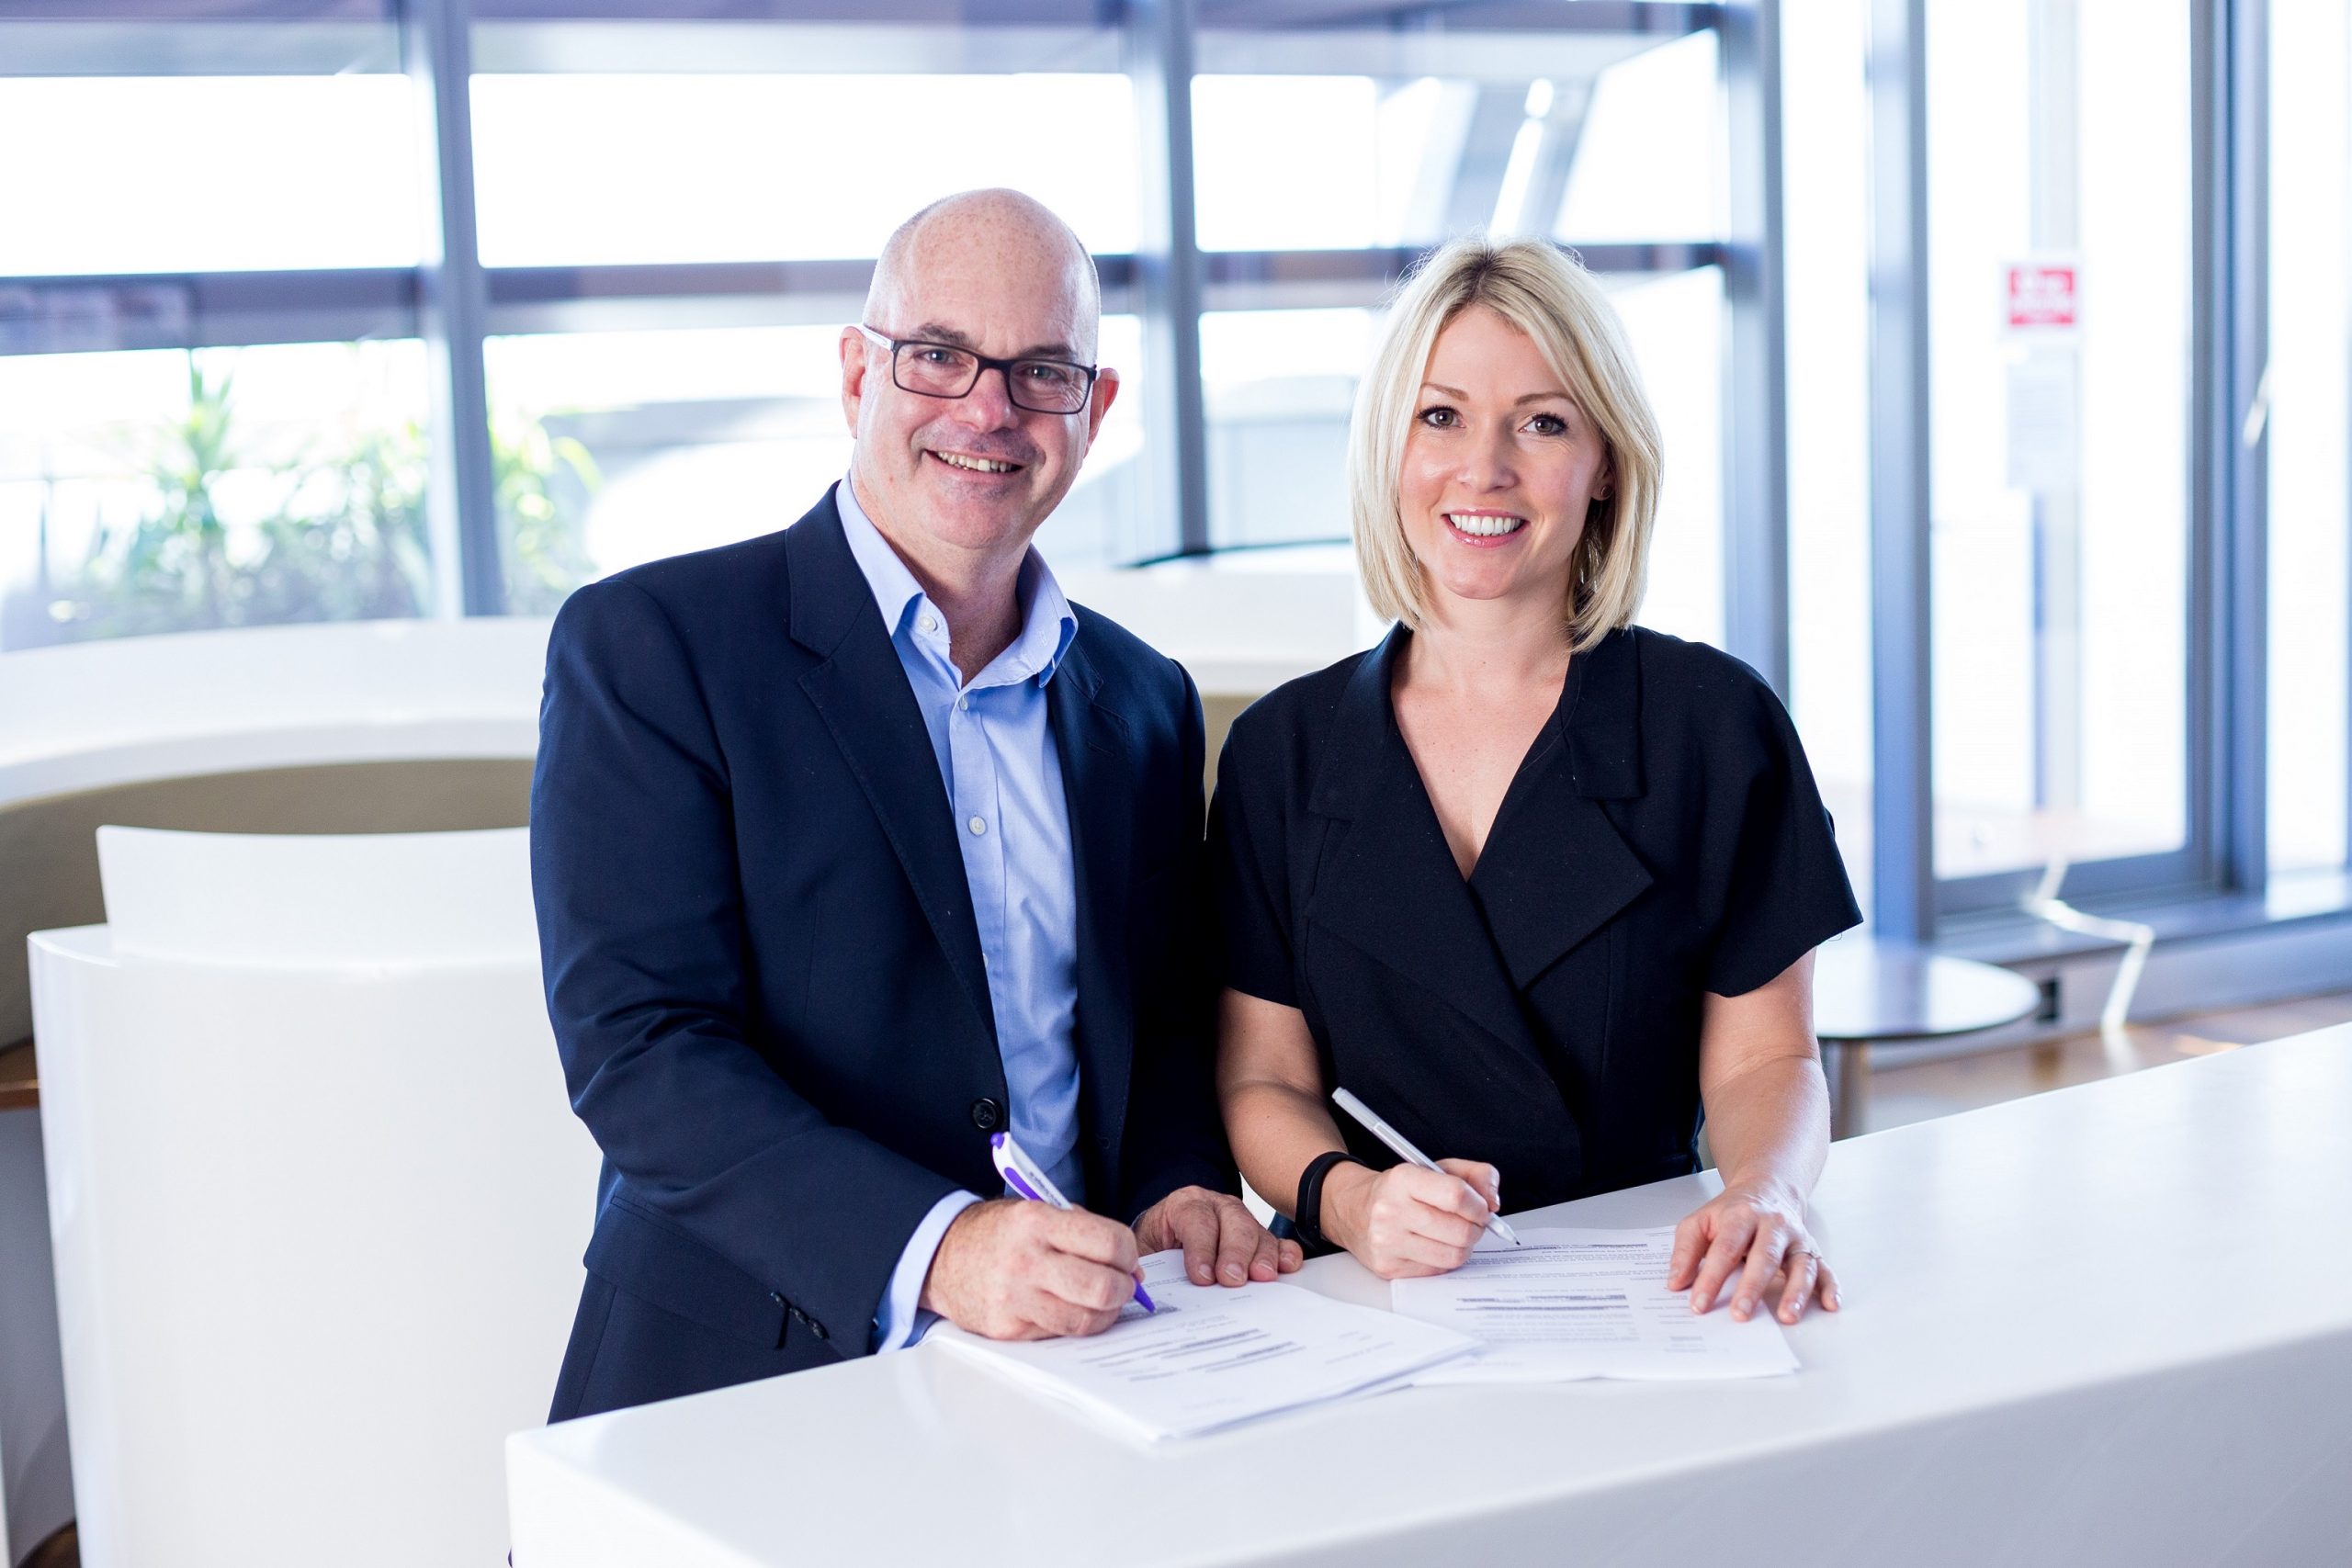 https://www.turnthetablespr.com/app/uploads/2020/05/Brad-Adams-and-Gemma-Tumelty-signing-the-Master-Franchise-agreement-in-Australia_s-1-scaled.jpg